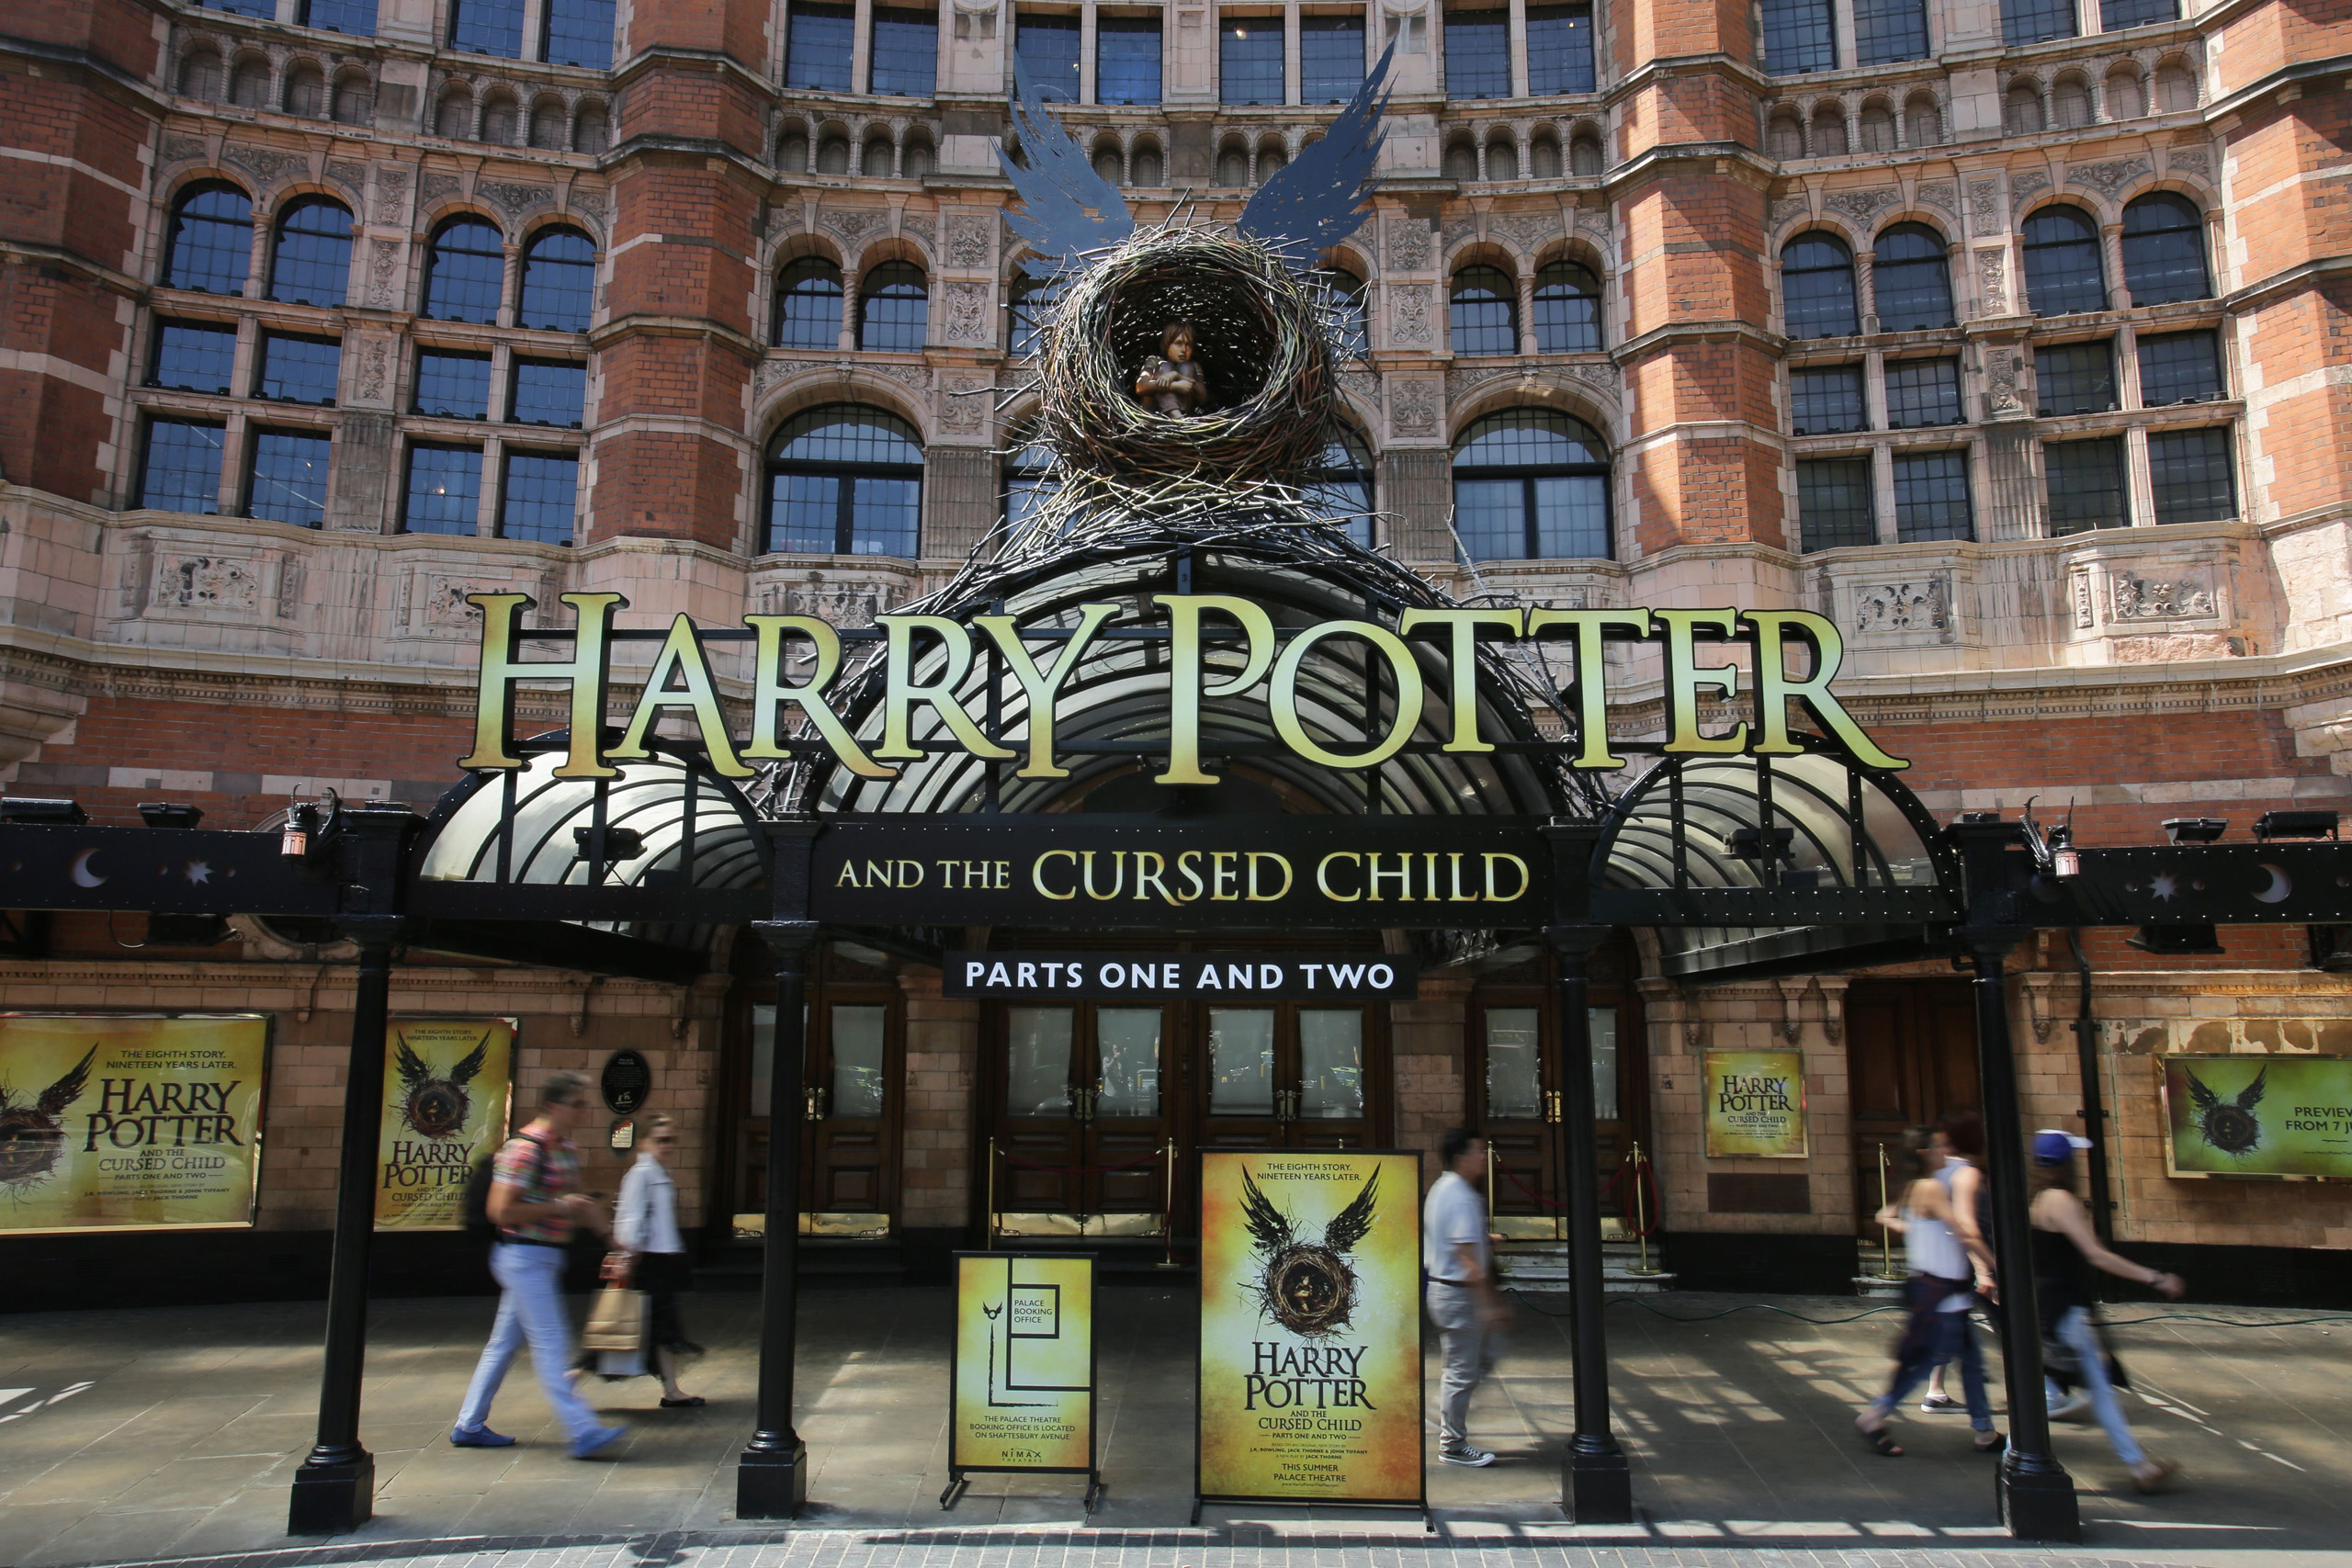 The front of the Palace Theatre promotes its new show 'Harry Potter and the Cursed Child'  in London on June 6, 2016. (Daniel Leal-Olivas—AFP/Getty Images)